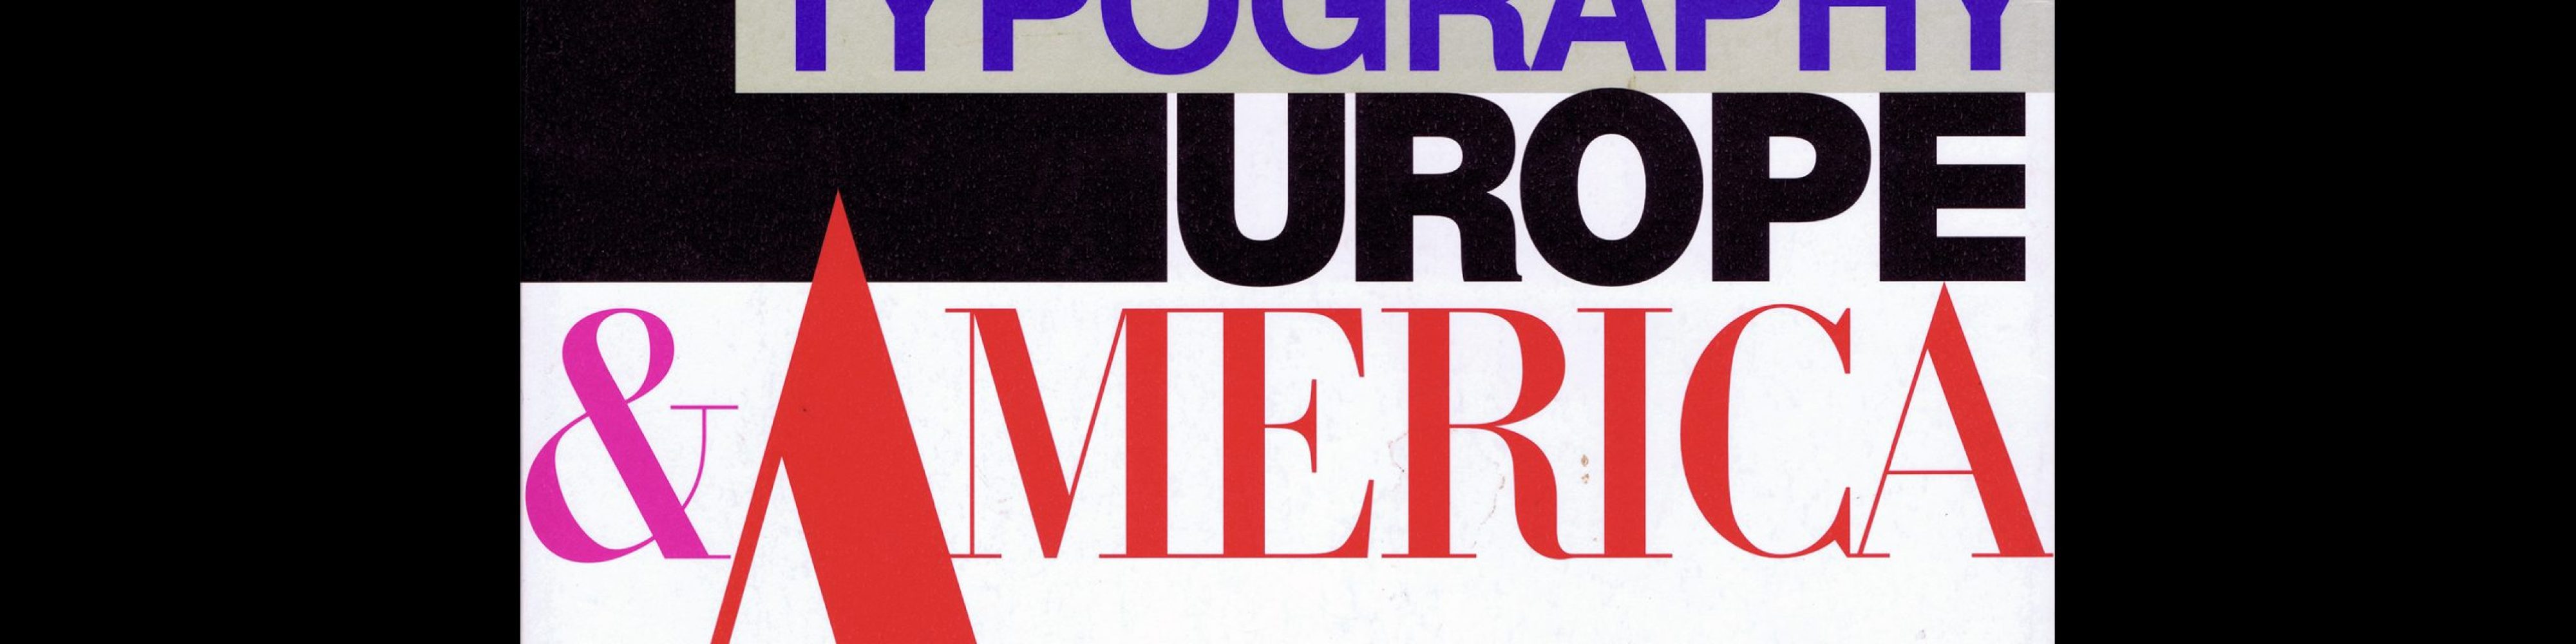 Transition of Modern Typography - Europe & America 1950s - '60s, 1996